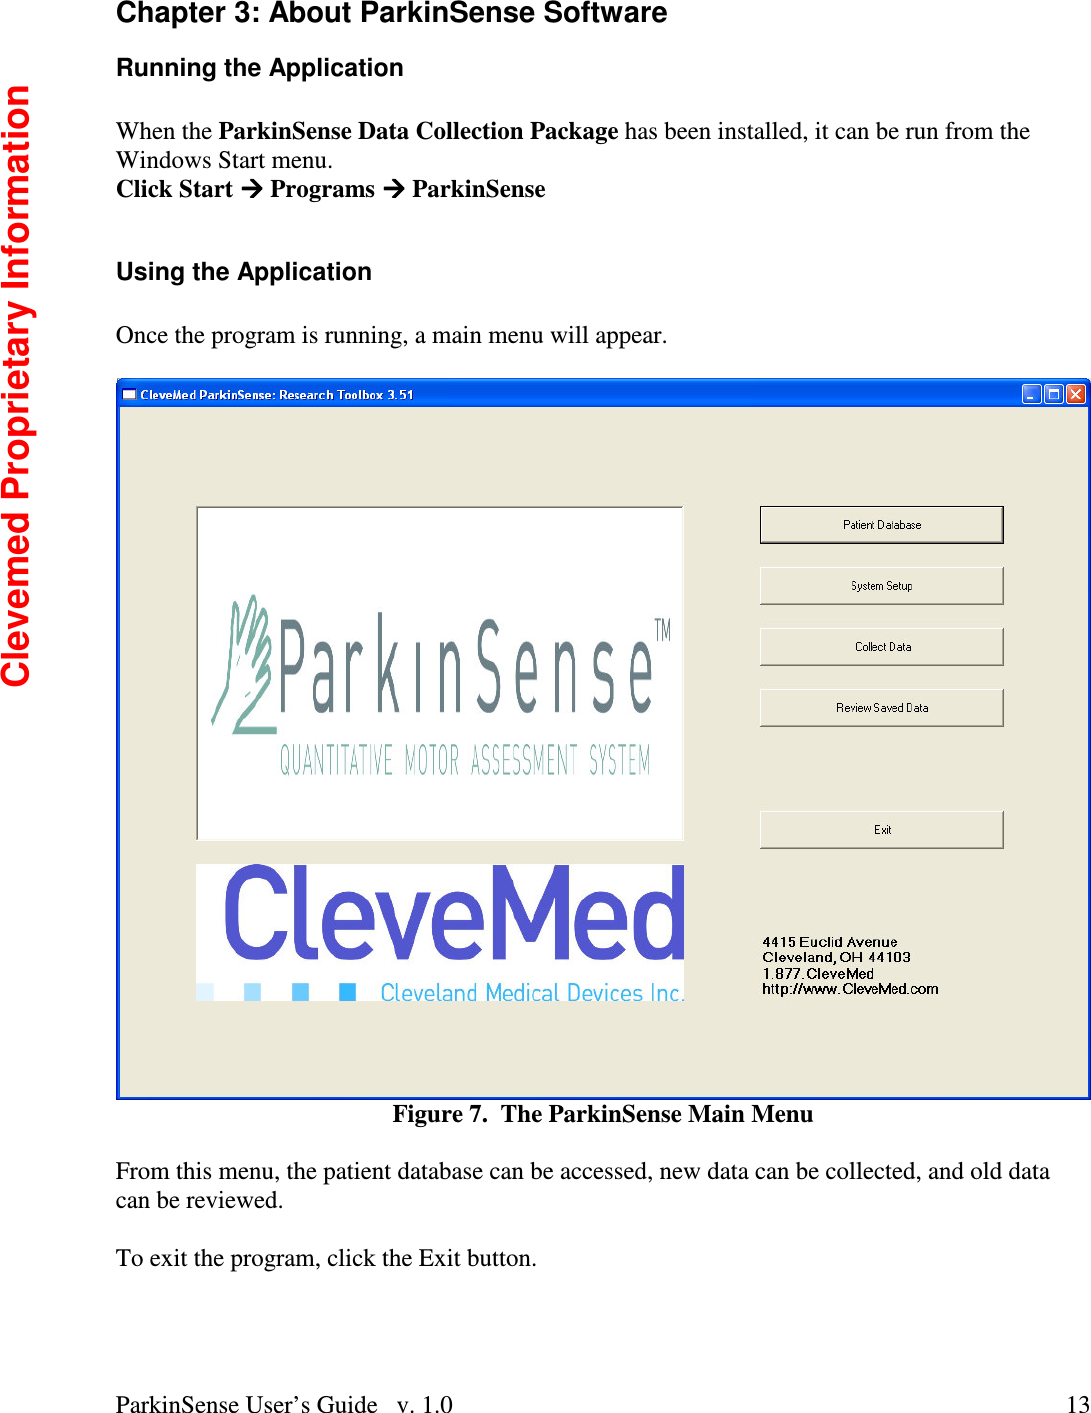 ParkinSense User’s Guide   v. 1.0  13Chapter 3: About ParkinSense Software Running the Application  When the ParkinSense Data Collection Package has been installed, it can be run from the Windows Start menu. Click Start  Programs  ParkinSense  Using the Application  Once the program is running, a main menu will appear.     Figure 7.  The ParkinSense Main Menu  From this menu, the patient database can be accessed, new data can be collected, and old data can be reviewed.    To exit the program, click the Exit button.   Clevemed Proprietary Information